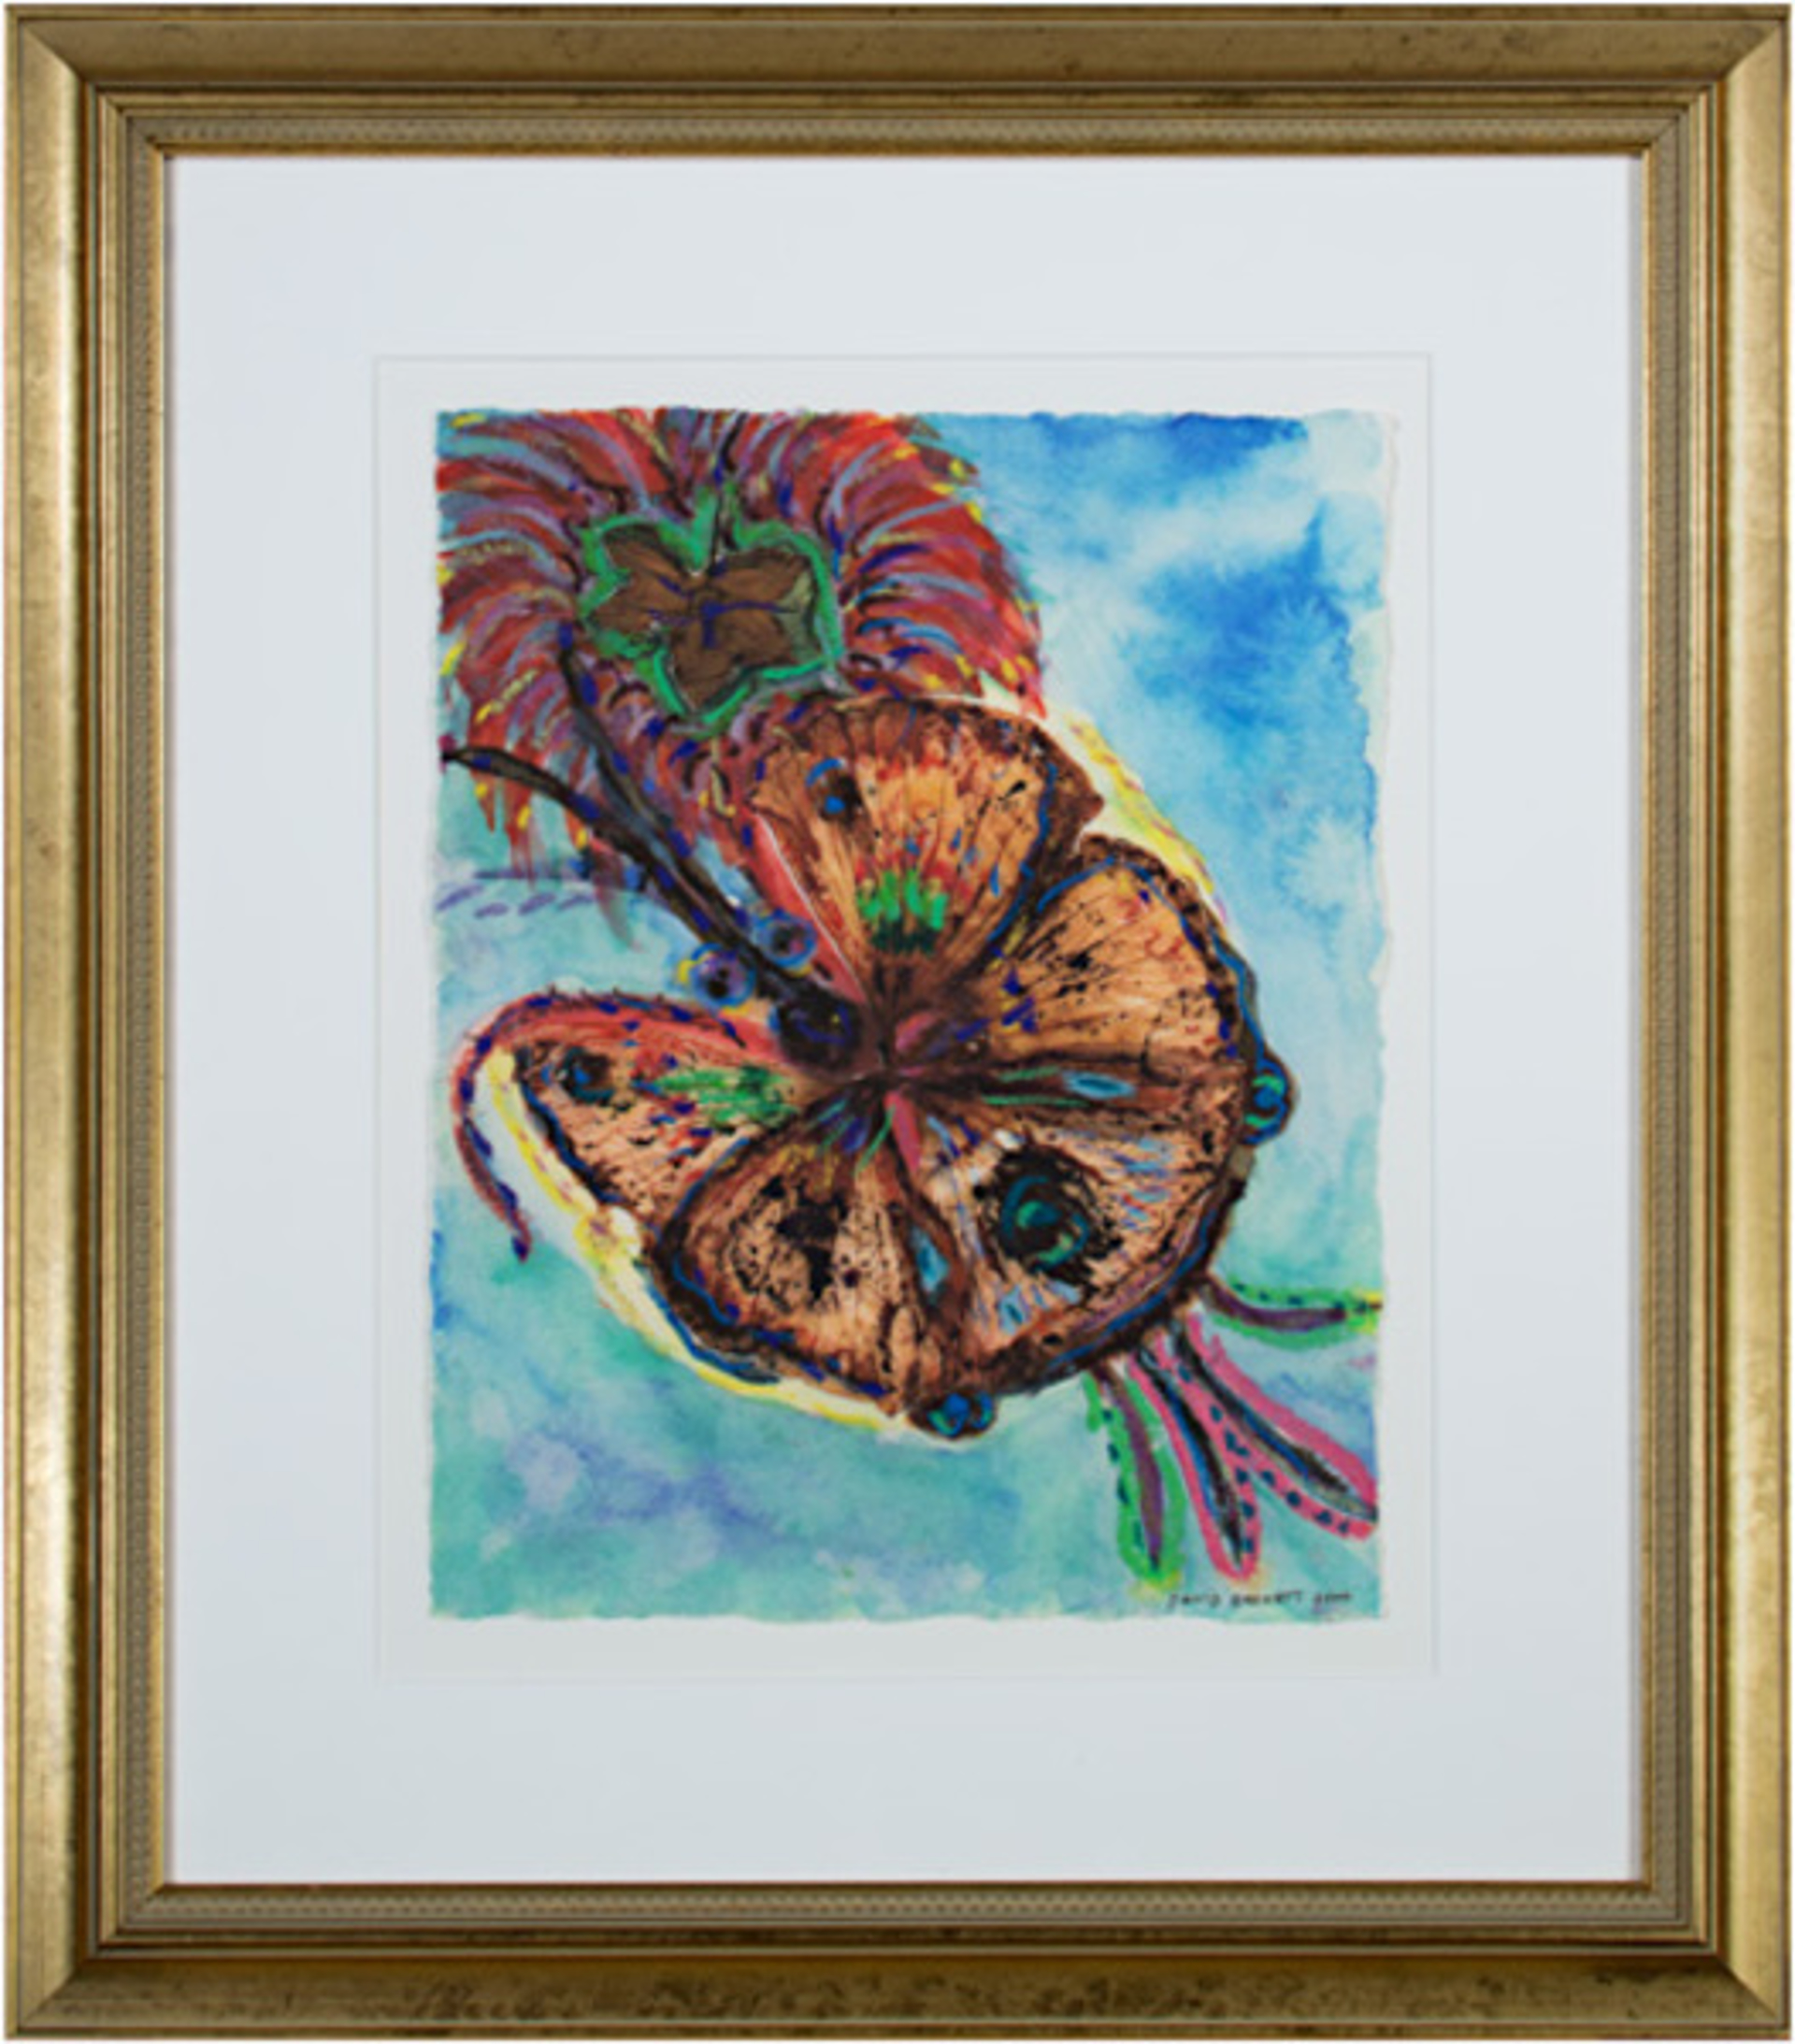 Giant Hybrid Hibiscus Butterfly with Flower by David Barnett